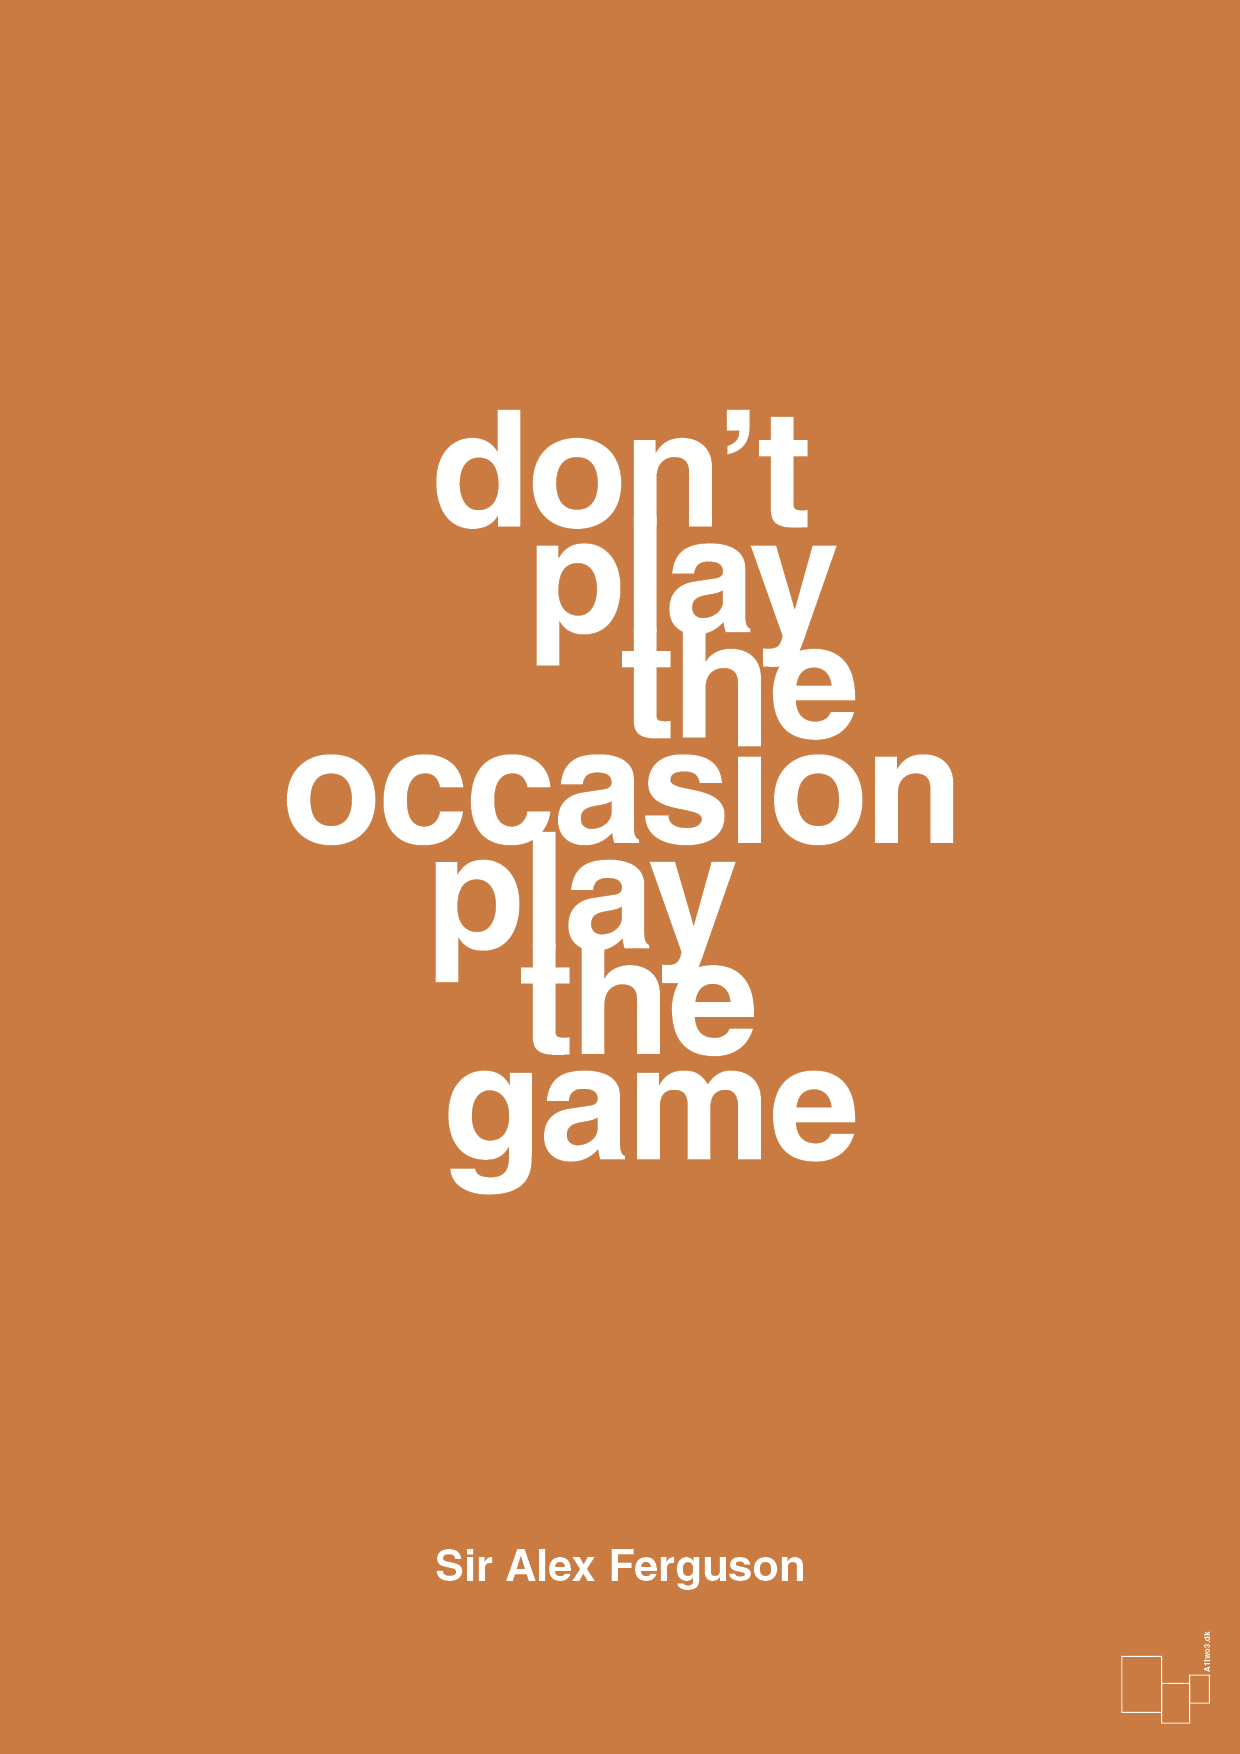 don’t play the occasion play the game - Plakat med Citater i Rumba Orange